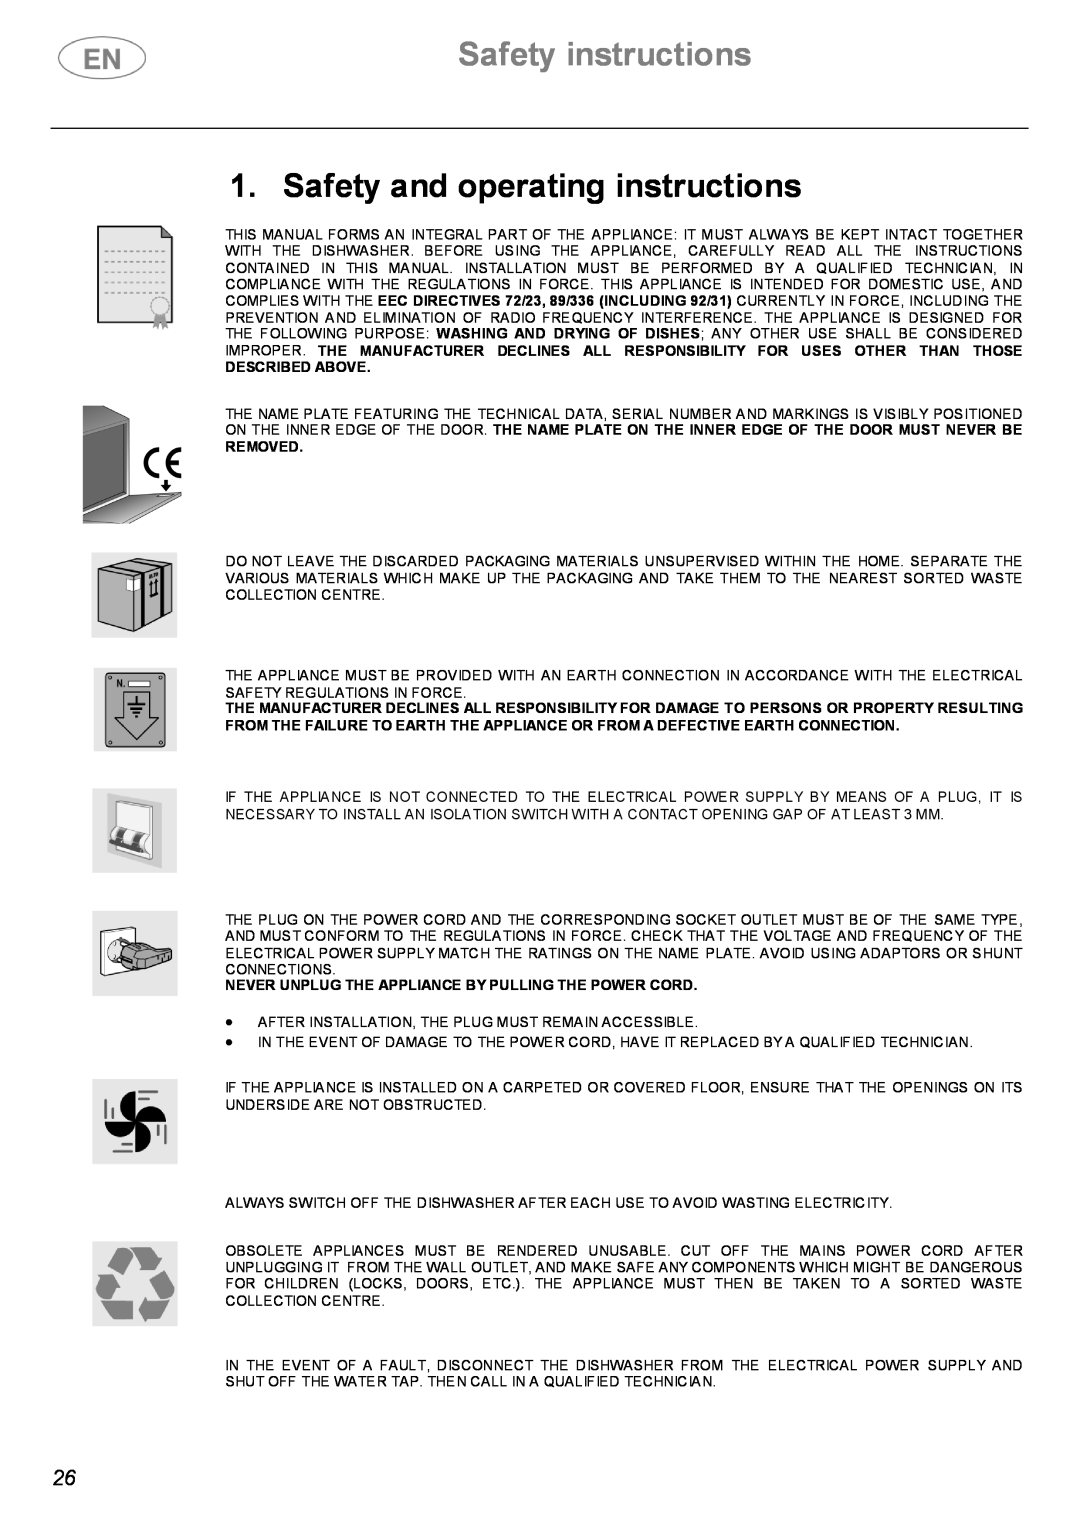 Smeg ST143 instruction manual Safety instructions, Safety and operating instructions, Described Above, Removed 